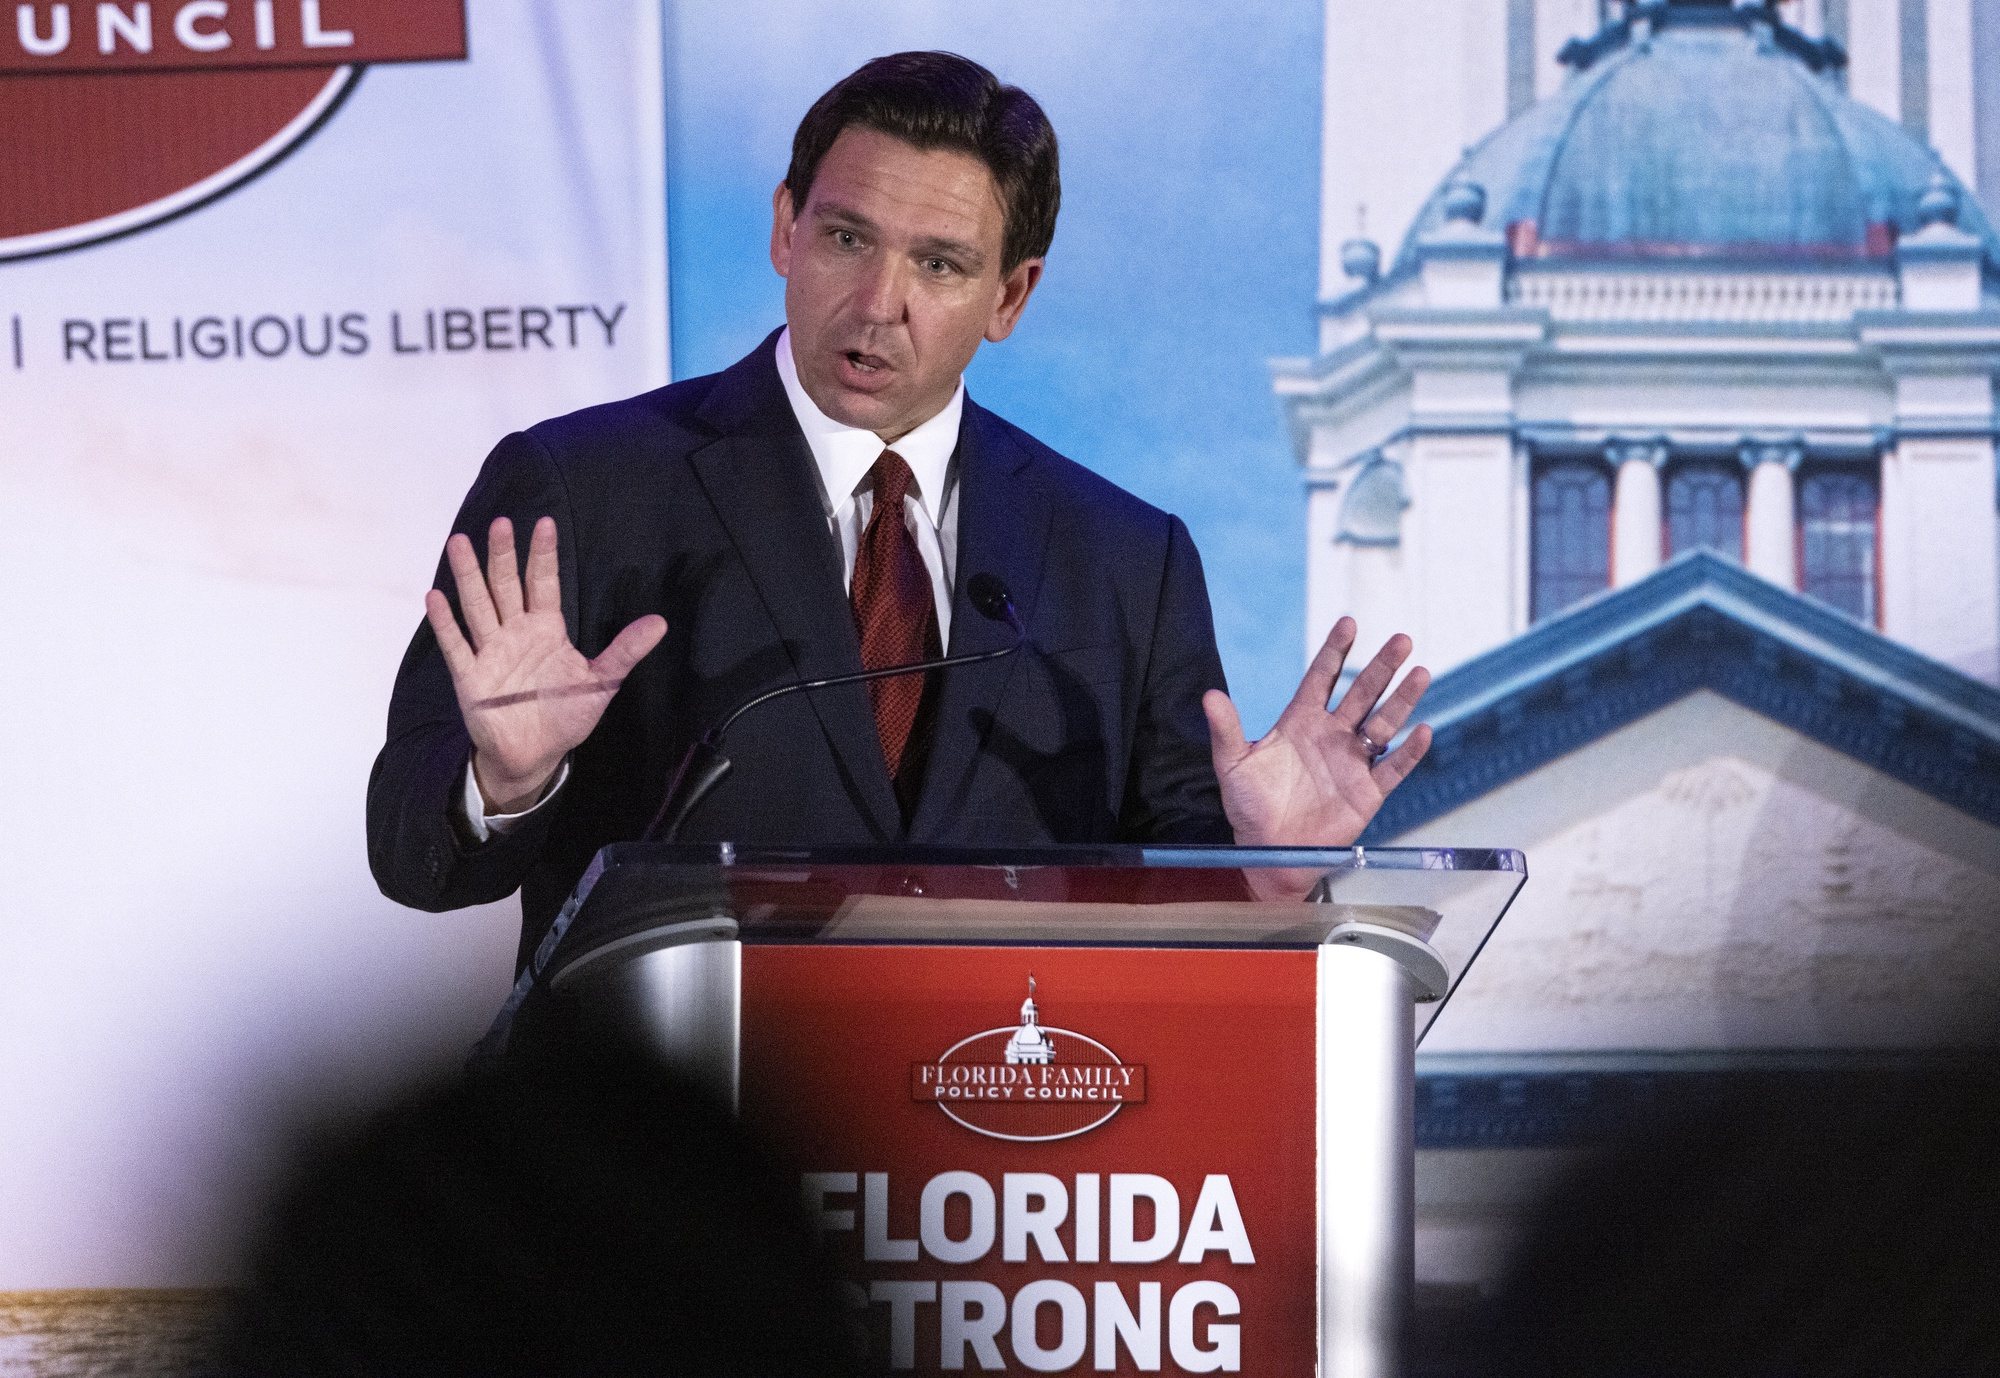 epa10642429 Florida Governor Ron DeSantis speaks during the Florida Family Policy Council 18th Annual Dinner Gala at the Rosen Plaza Hotel in Orlando, Florida, USA, 20 May 2023. According to several media sources, DeSantis is expected to file Federal Election Commission paperwork declaring his candidacy next week in Miami, Florida. Florida Family Policy Council (FFPC) is one of 38 state-based policy councils around the country associated with the Family Policy Alliance.  EPA/CRISTOBAL HERRERA-ULASHKEVICH